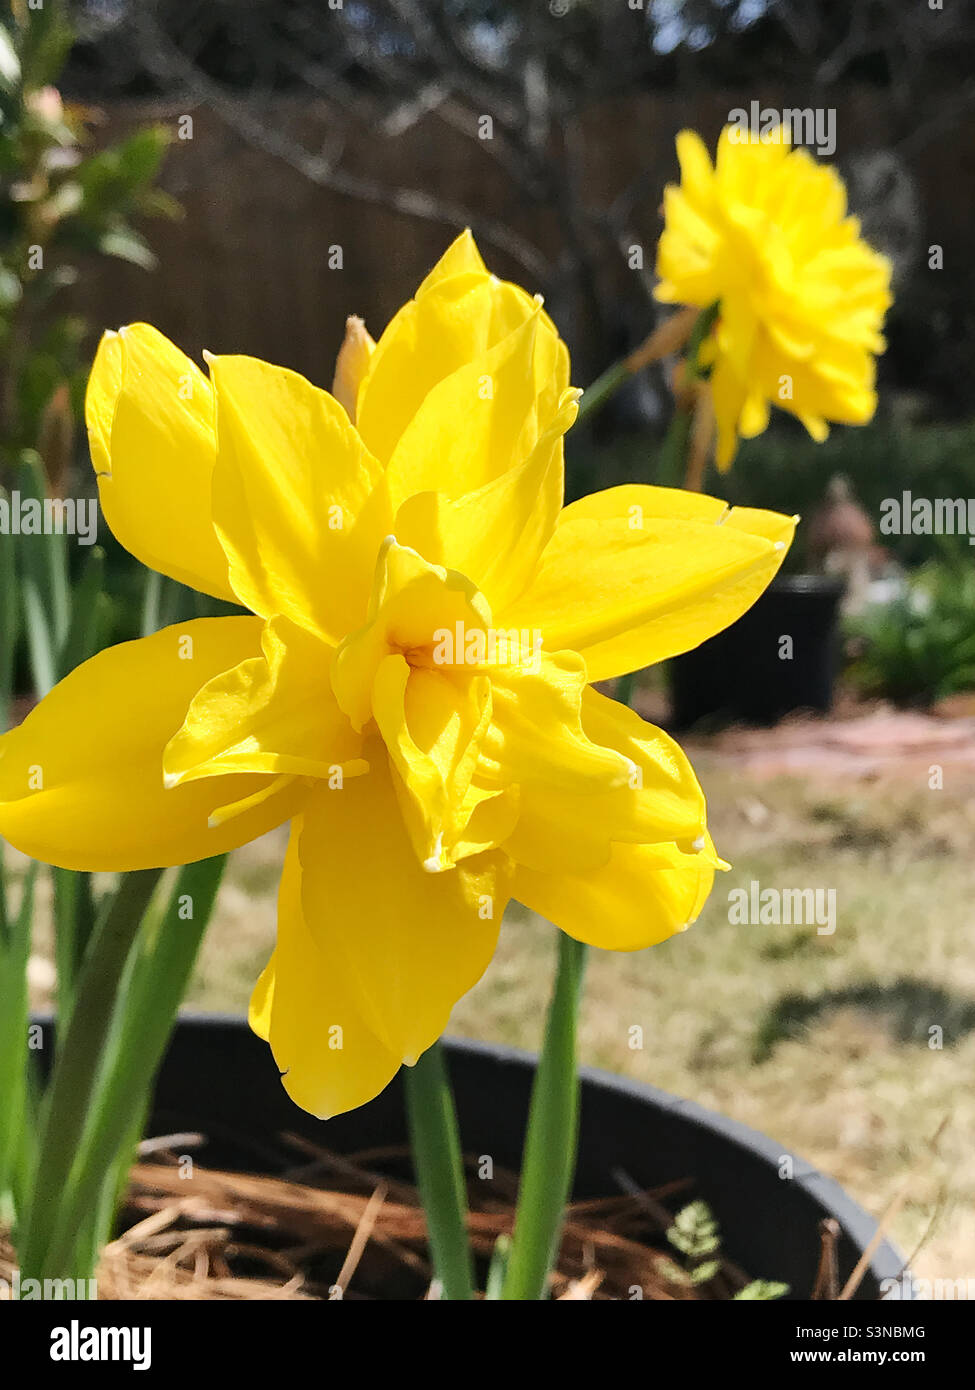 Springtime bright and cheerful yellow colored daffodils growing outdoors. Stock Photo